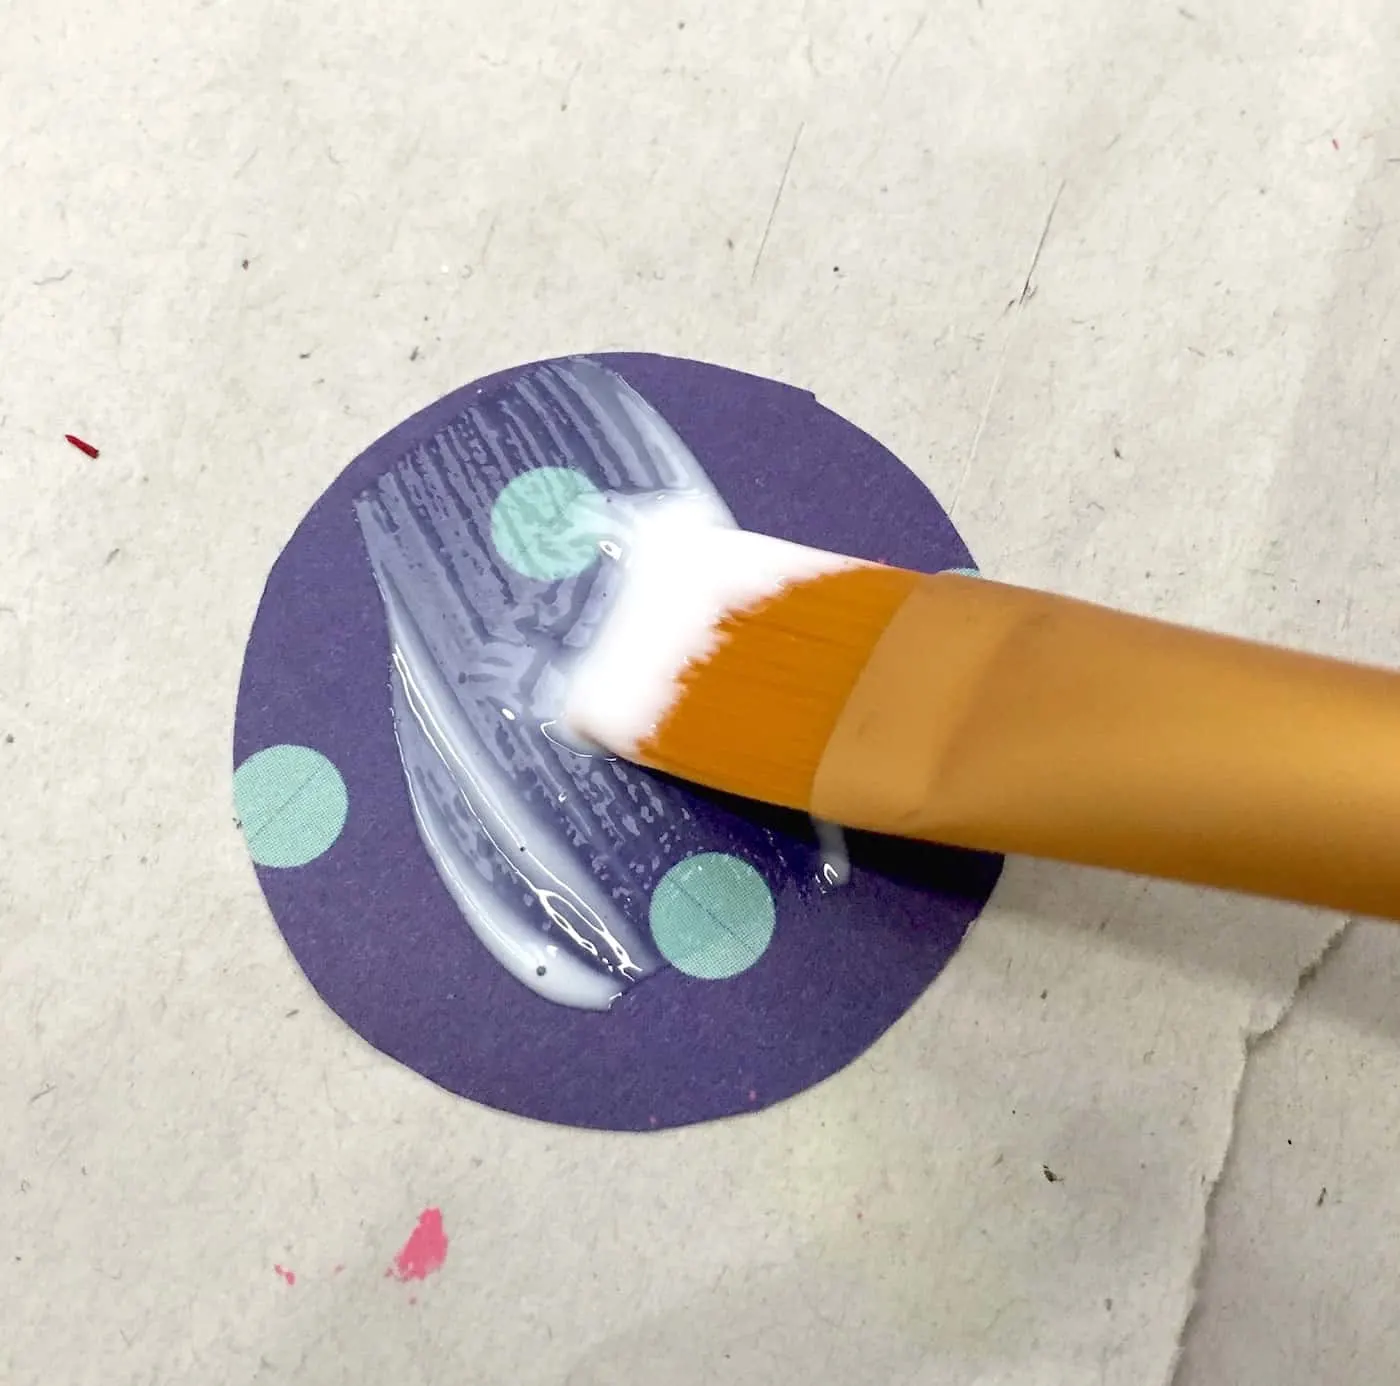 Medium layer of Mod Podge applied to a circular piece of scrapbook paper